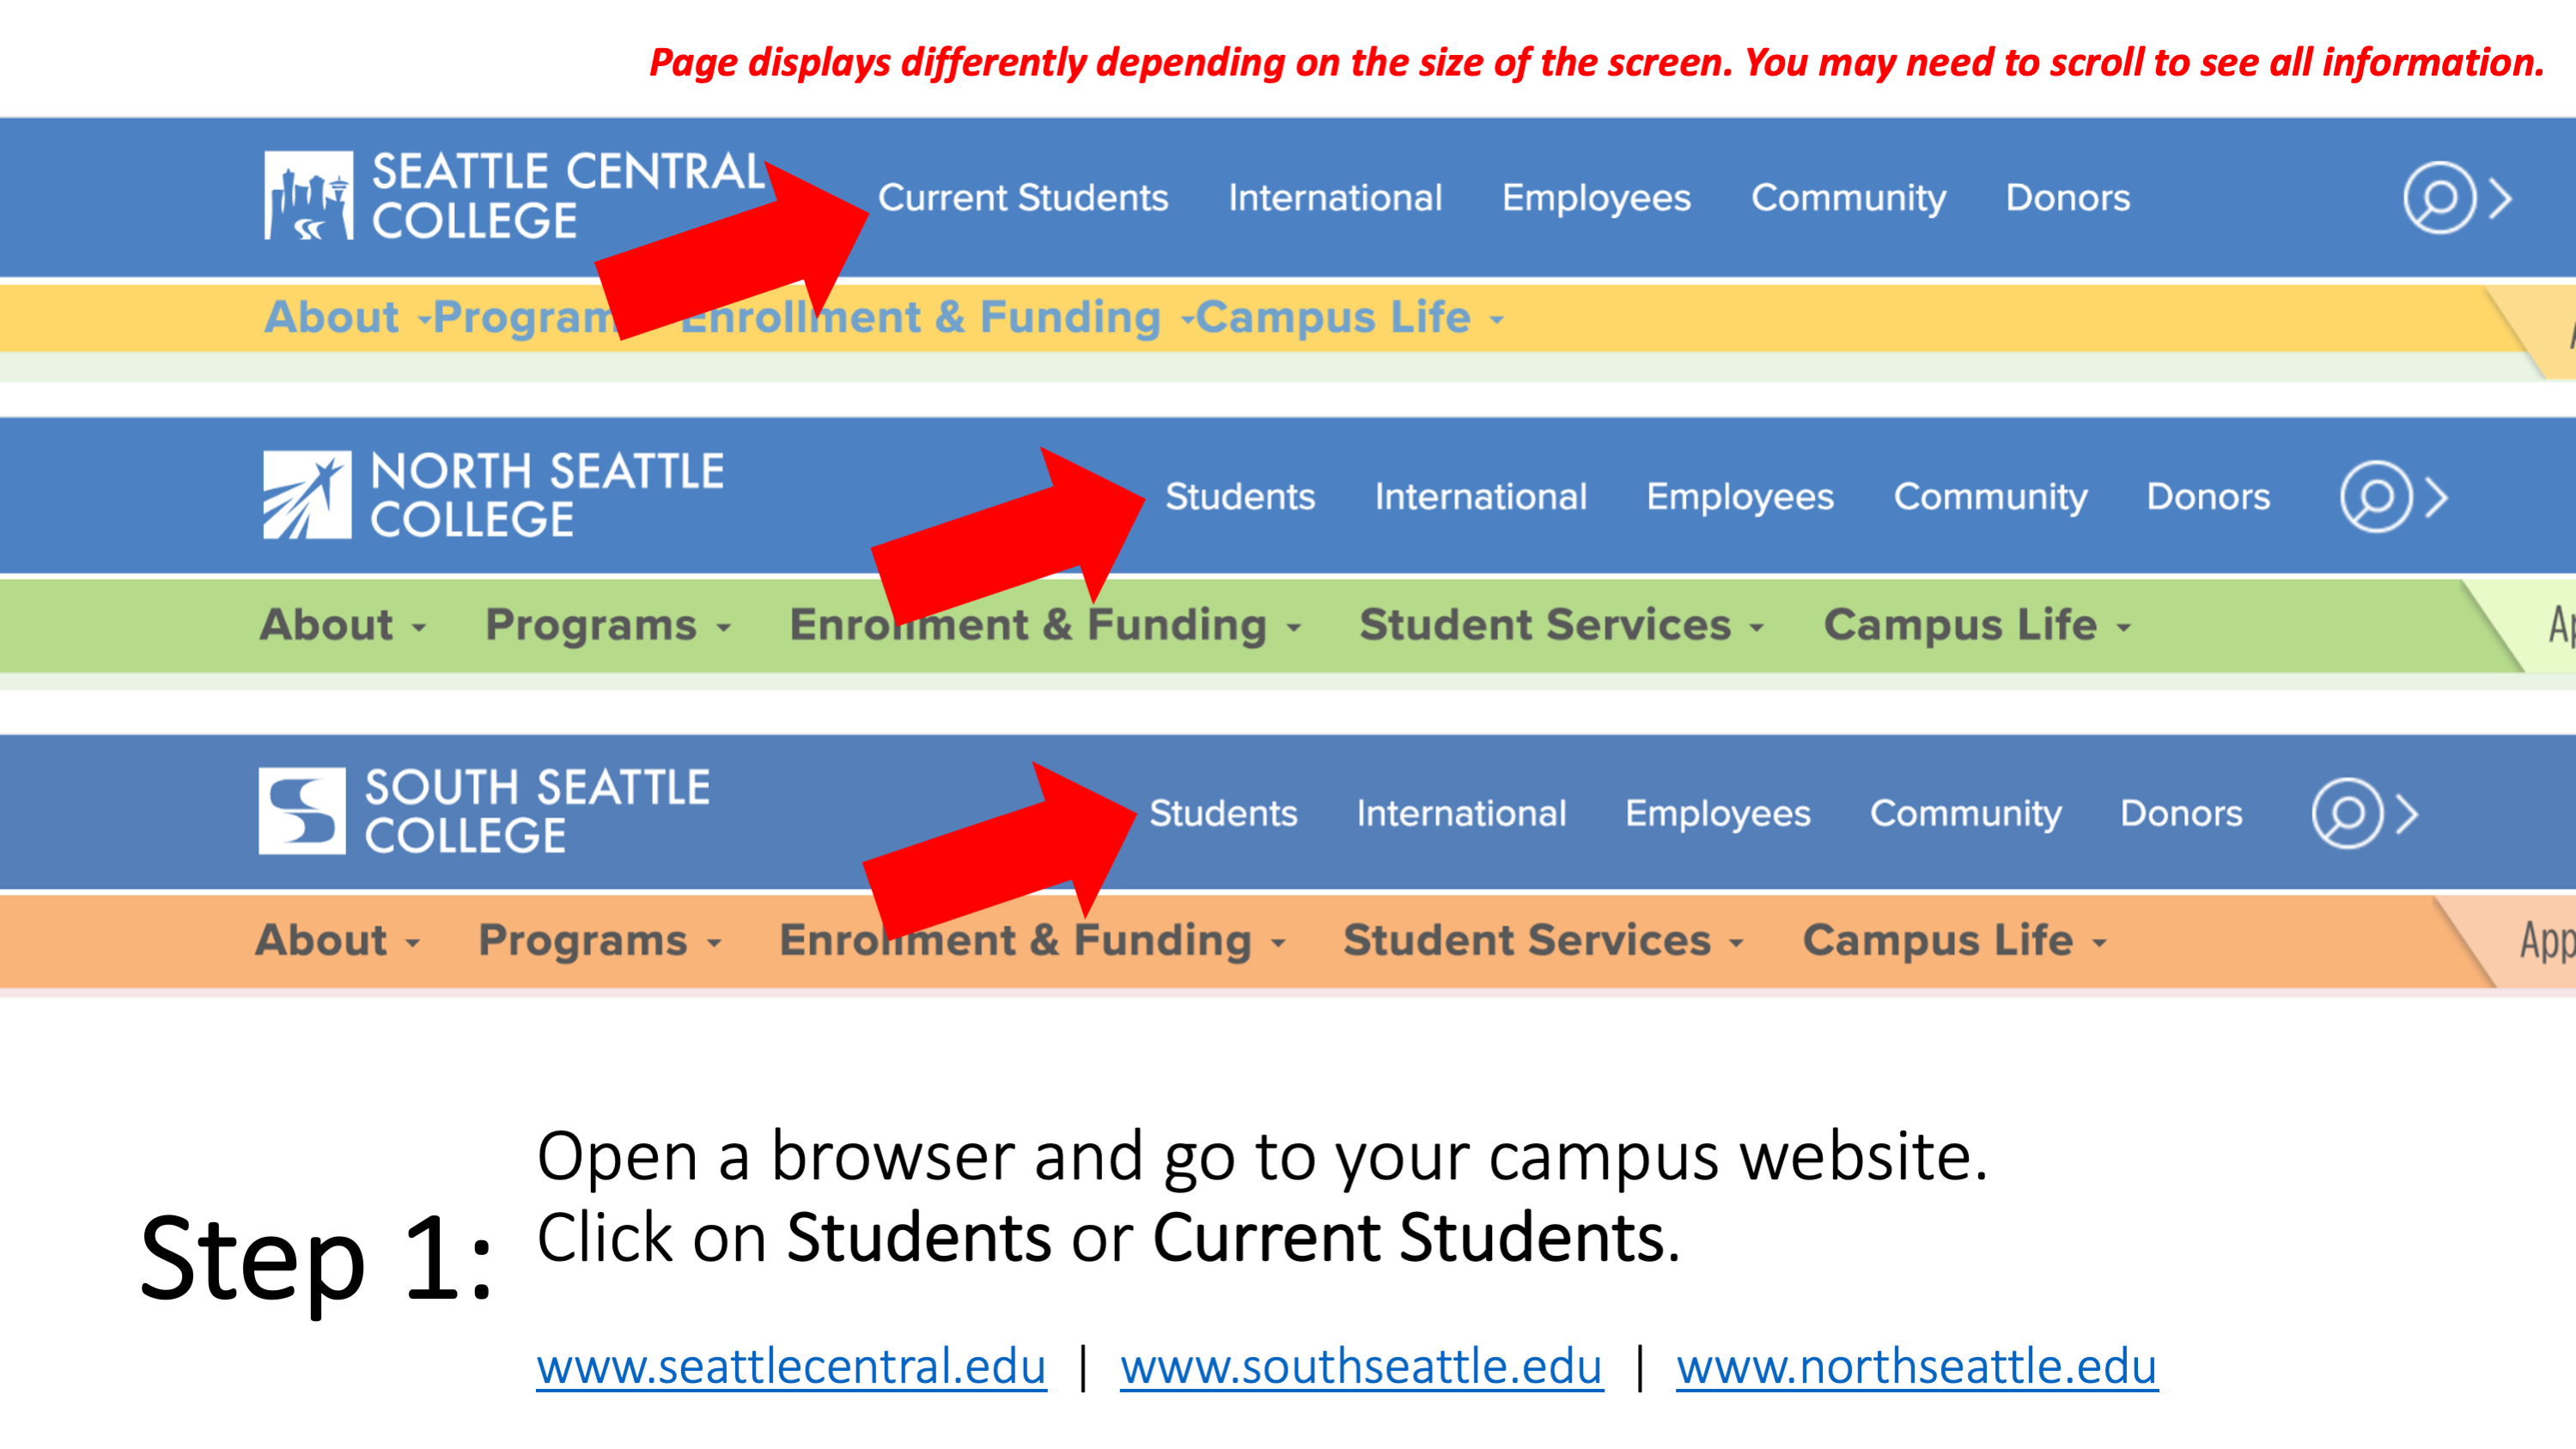 Step 1: Open a browser and go to your campus website. Click on Students or Current Students. www.seattlecentral.edu , www.southseattle.edu , or www.northseattle.edu. Page displays differently depending on the size of the screen. You may need to scroll to see all information.